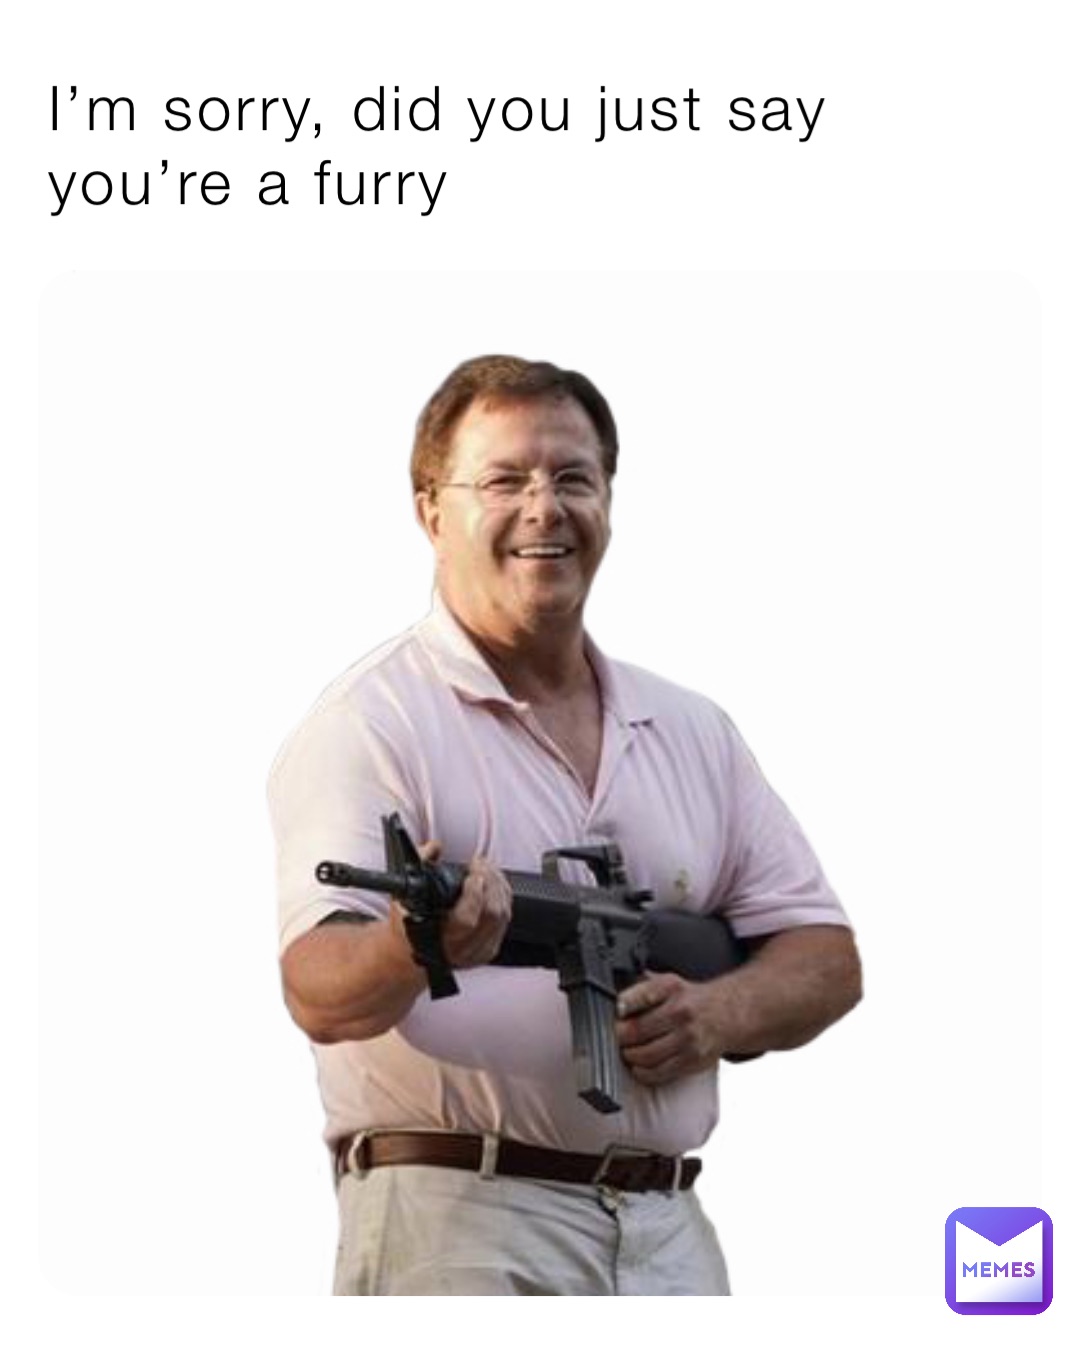 I’m sorry, did you just say you’re a furry